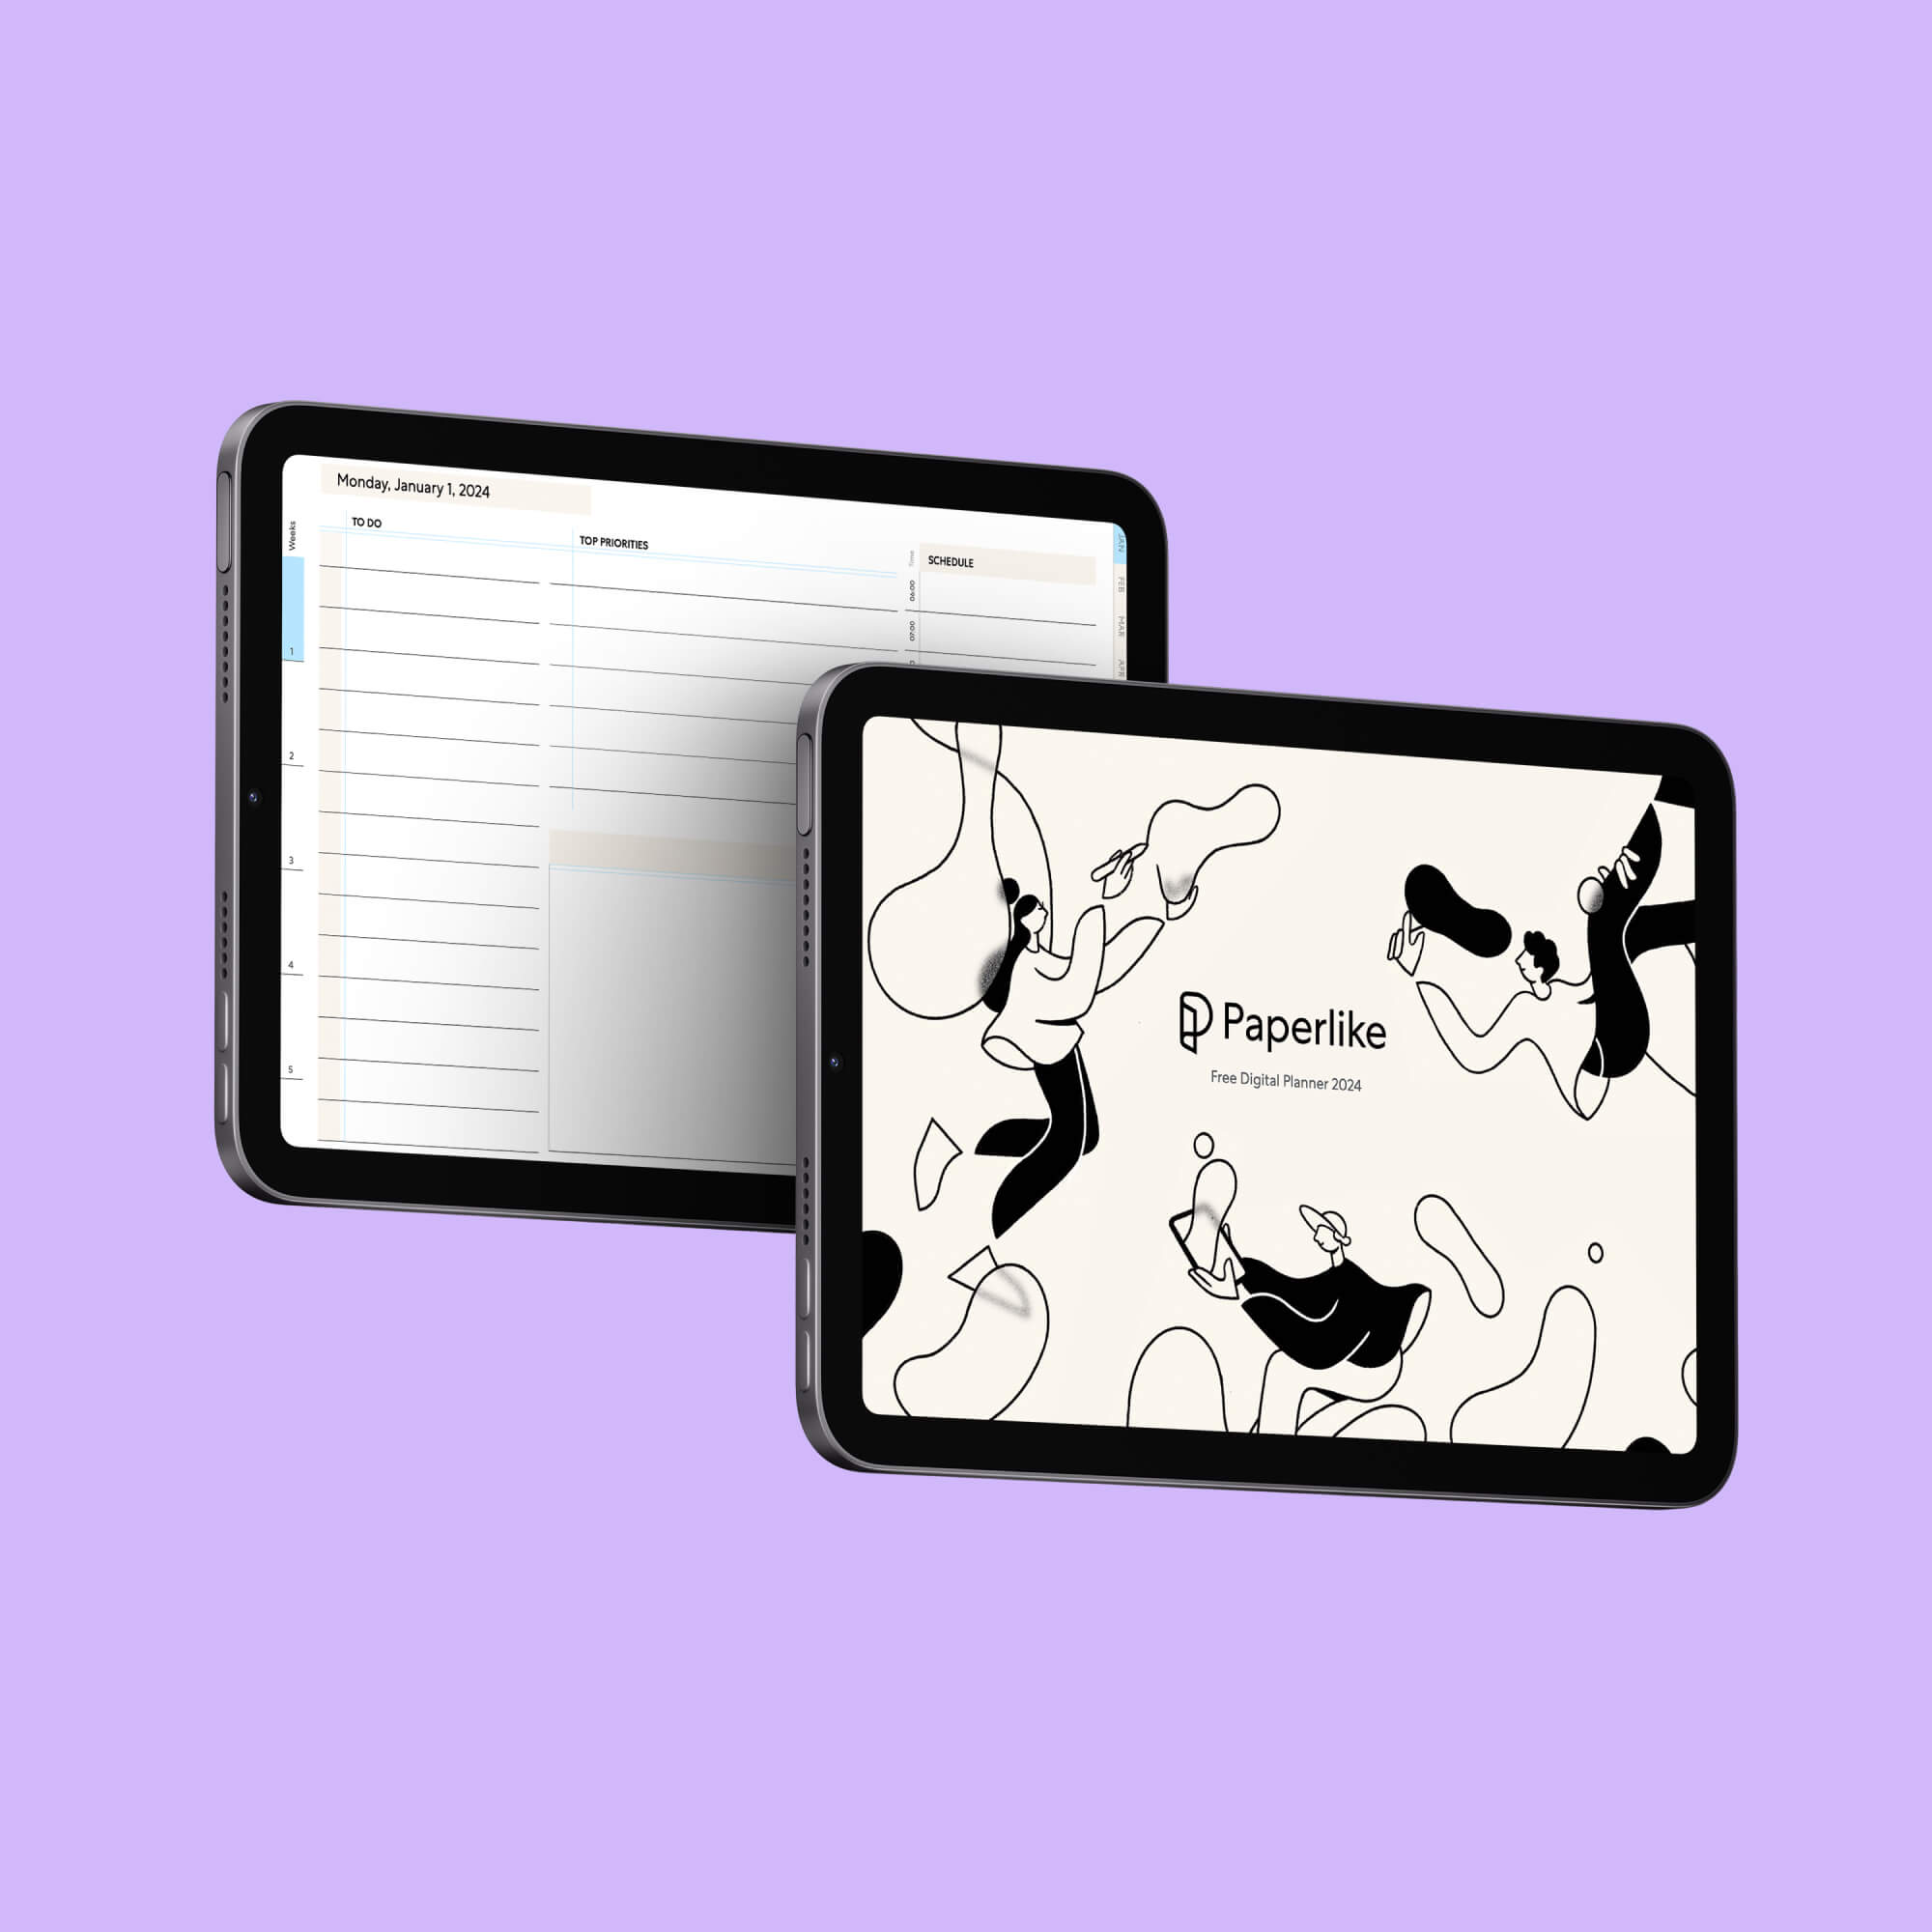 2 iPads with light mode digital planner on display on a purple background